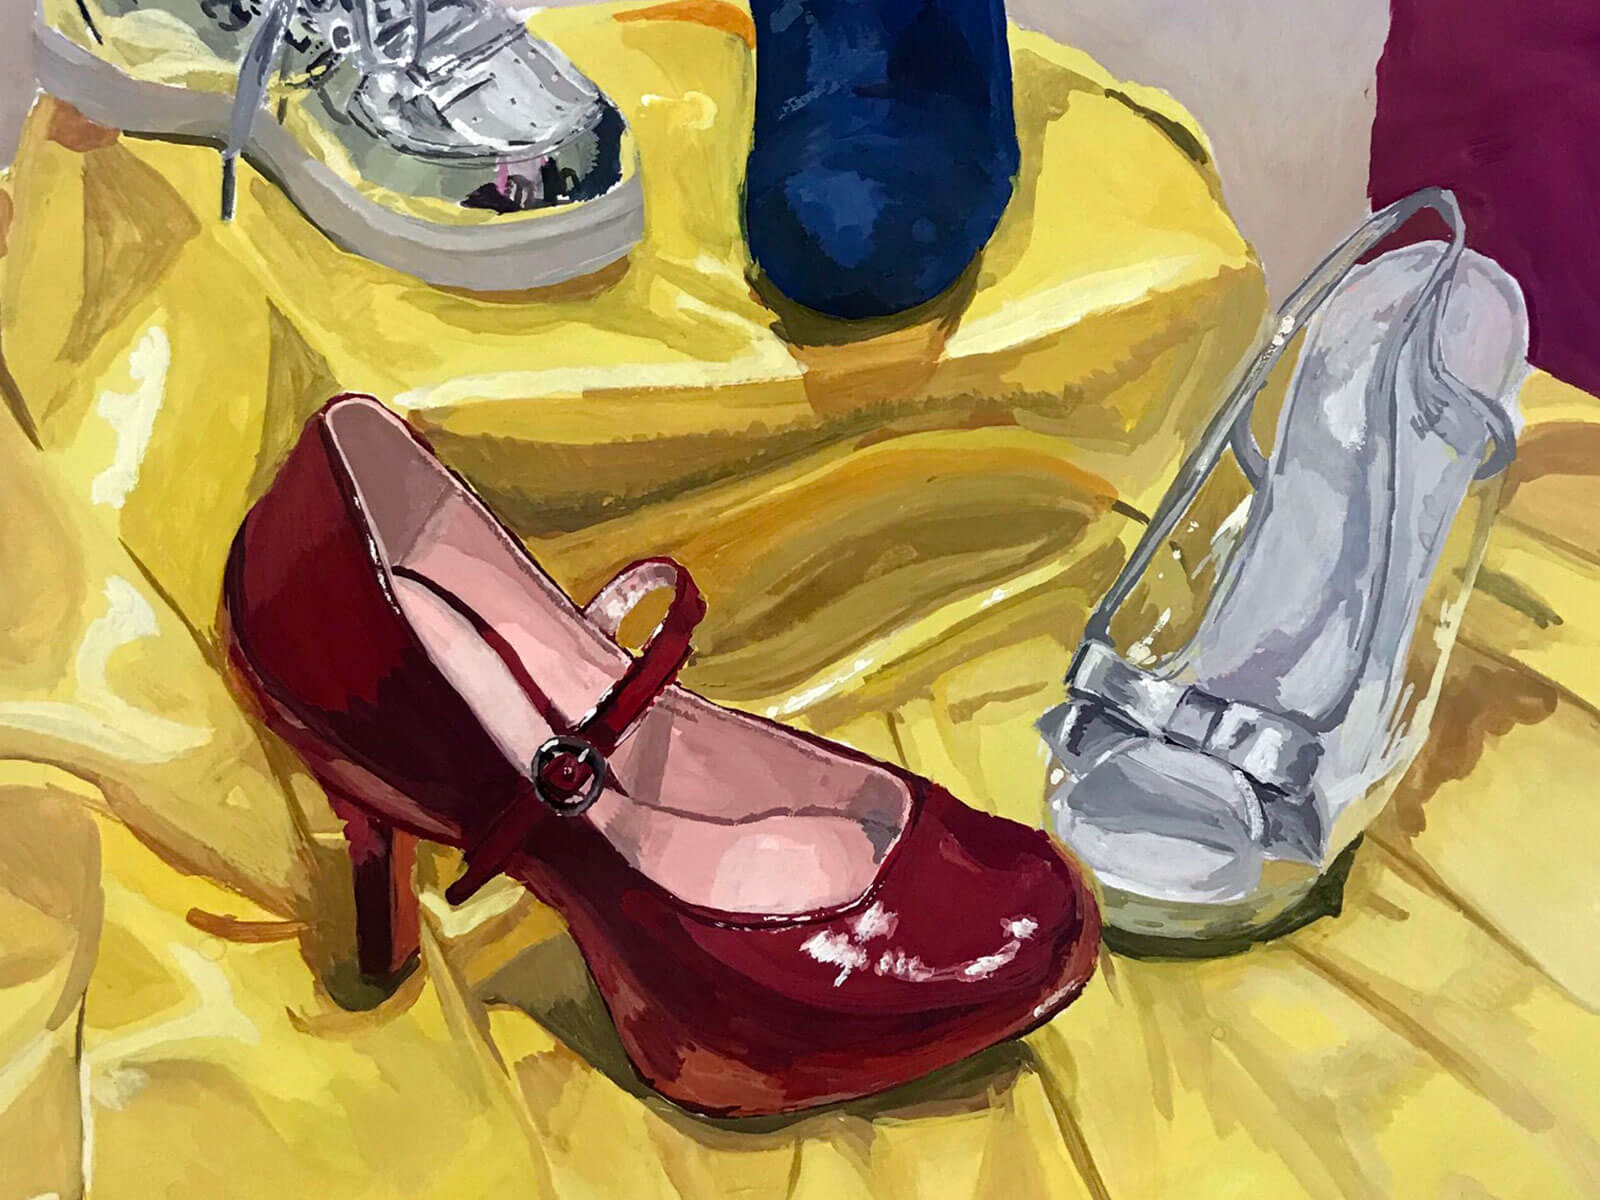 Various shoes, including high-heeled red and sliver, on a yellow cloth